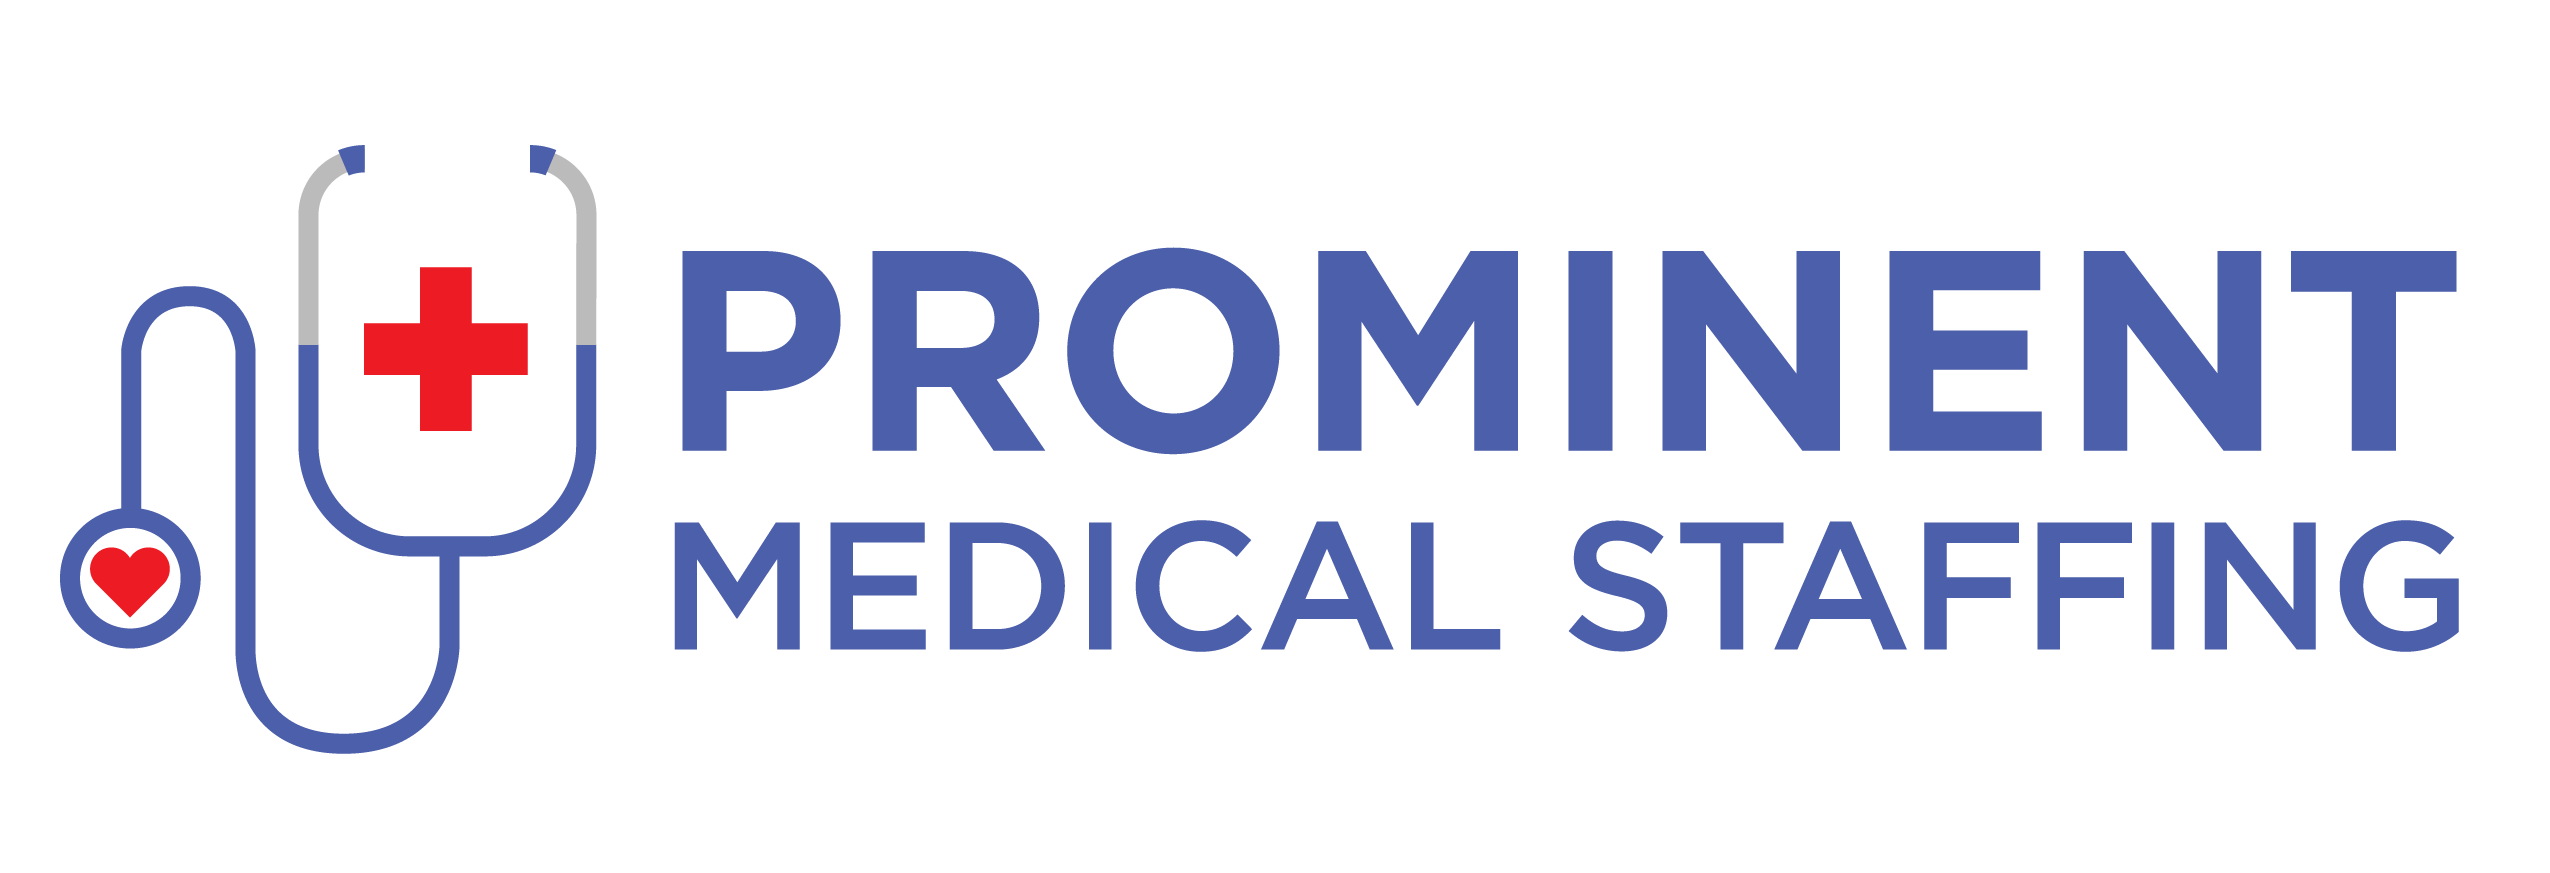 Prominent Medical Staffing